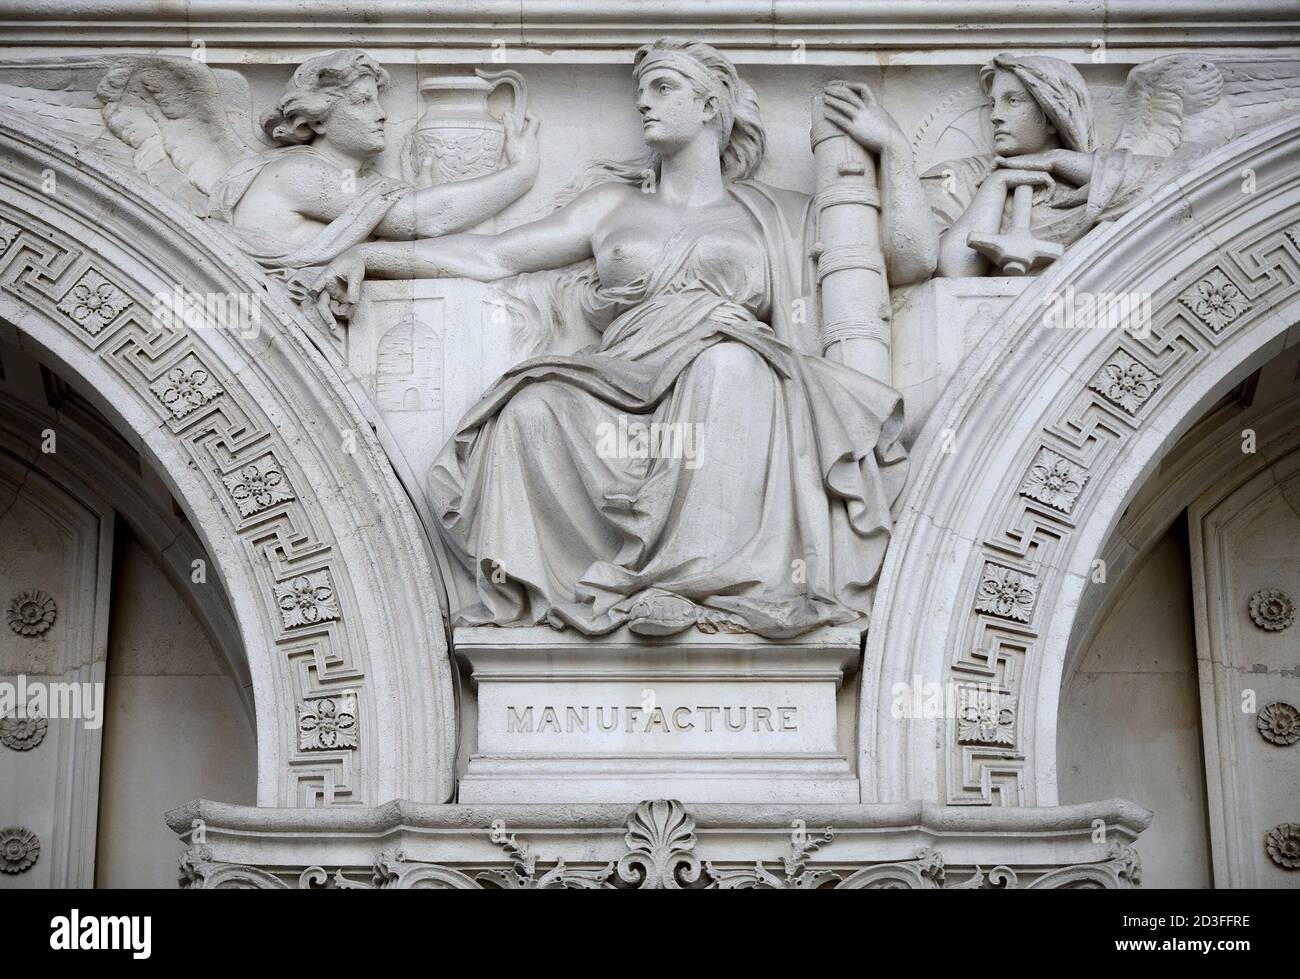 London, England, UK. Foreign and Commonwealth Office (1868) Whitehall. Allegorical figure (Henry Hugh Armstead: 1828-1905) representing Manufacture Stock Photo